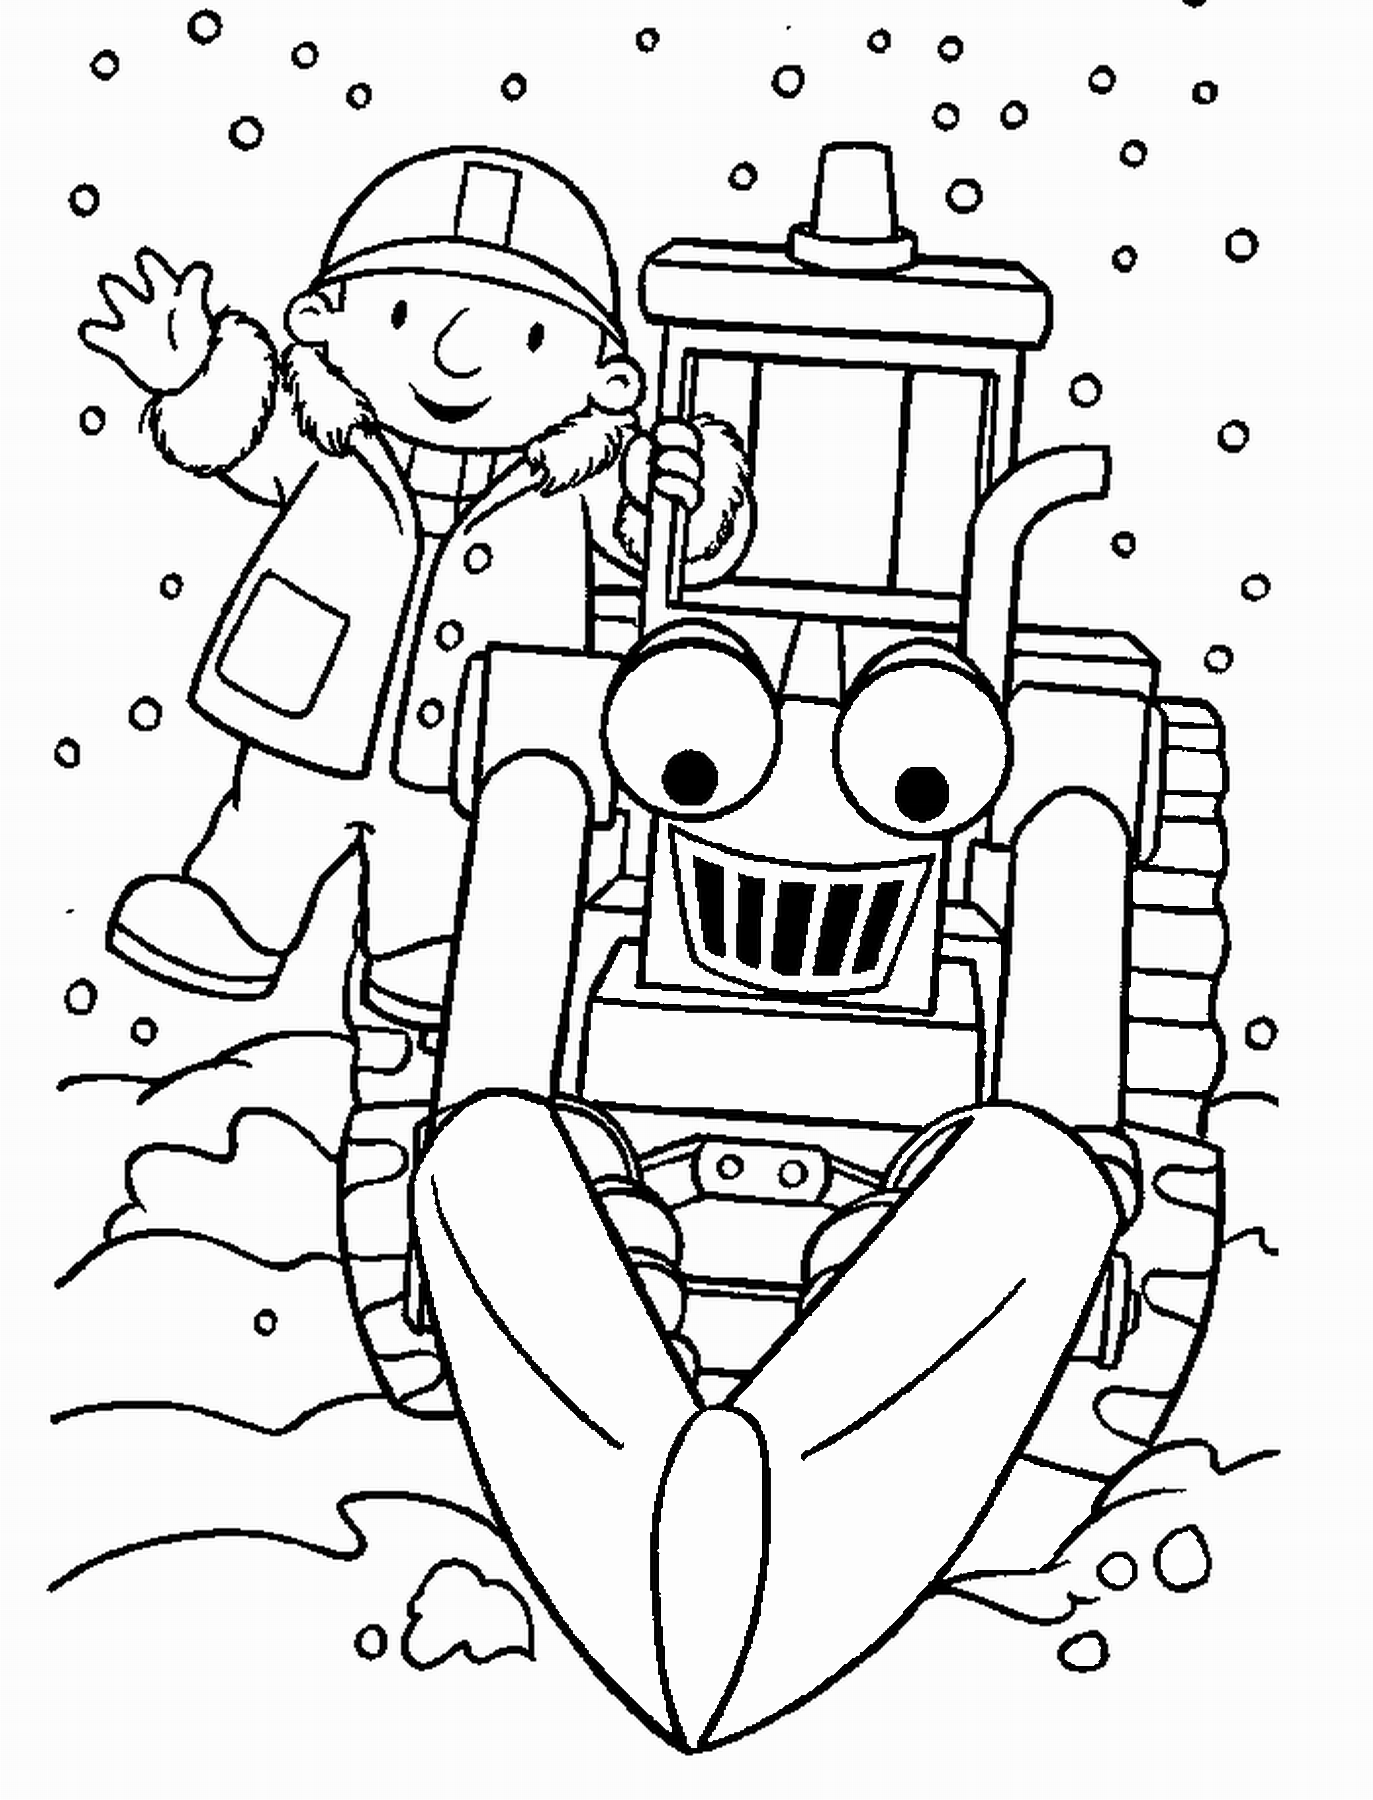 Bob the Builder Coloring Pages TV Film bob the builder_27 Printable 2020 00977 Coloring4free